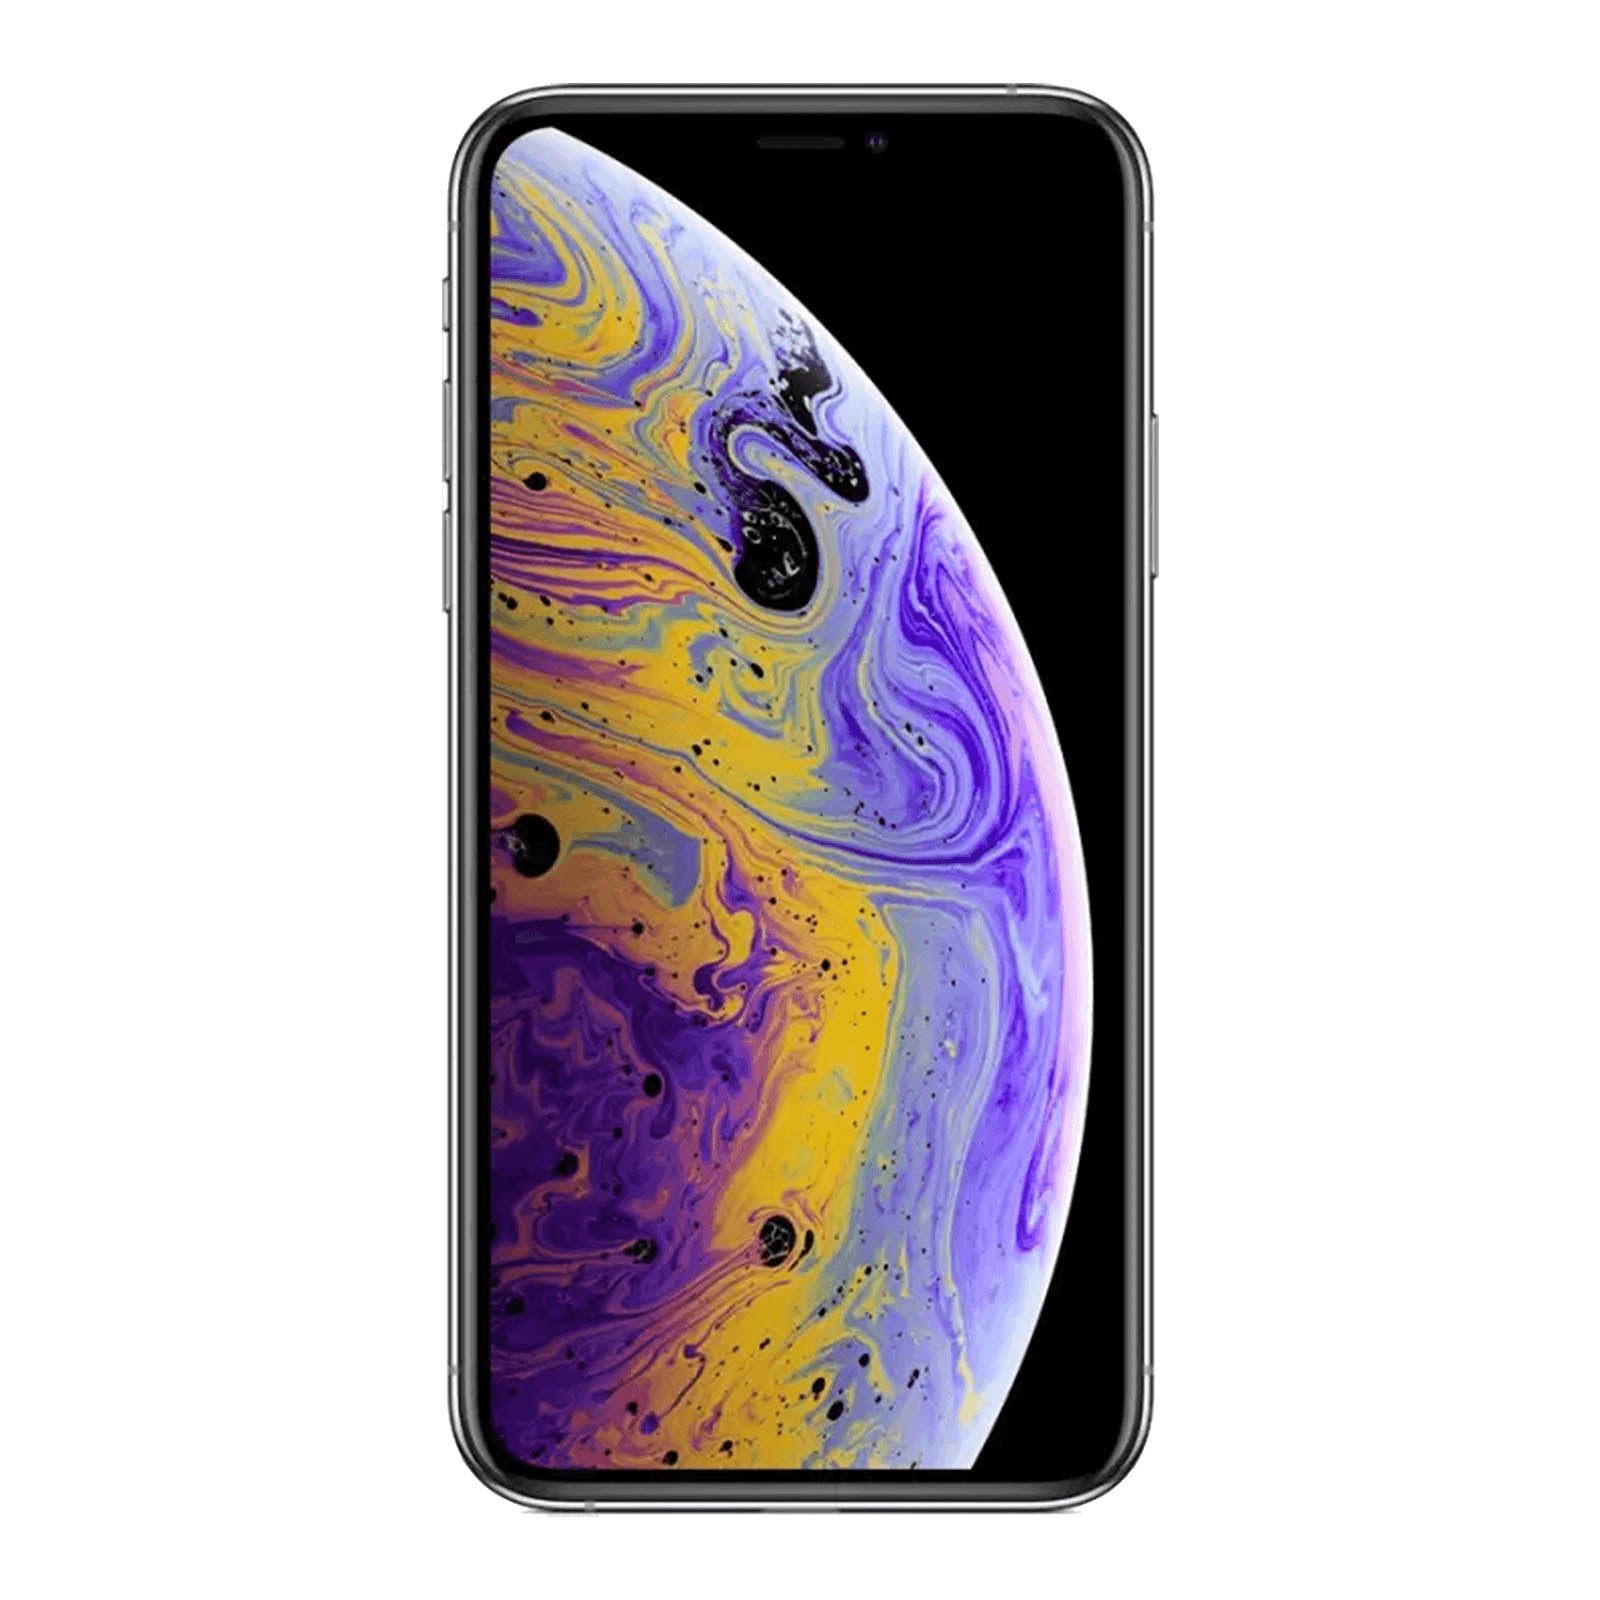 Apple iPhone XS 512GB Silver Very Good - T-Mobile